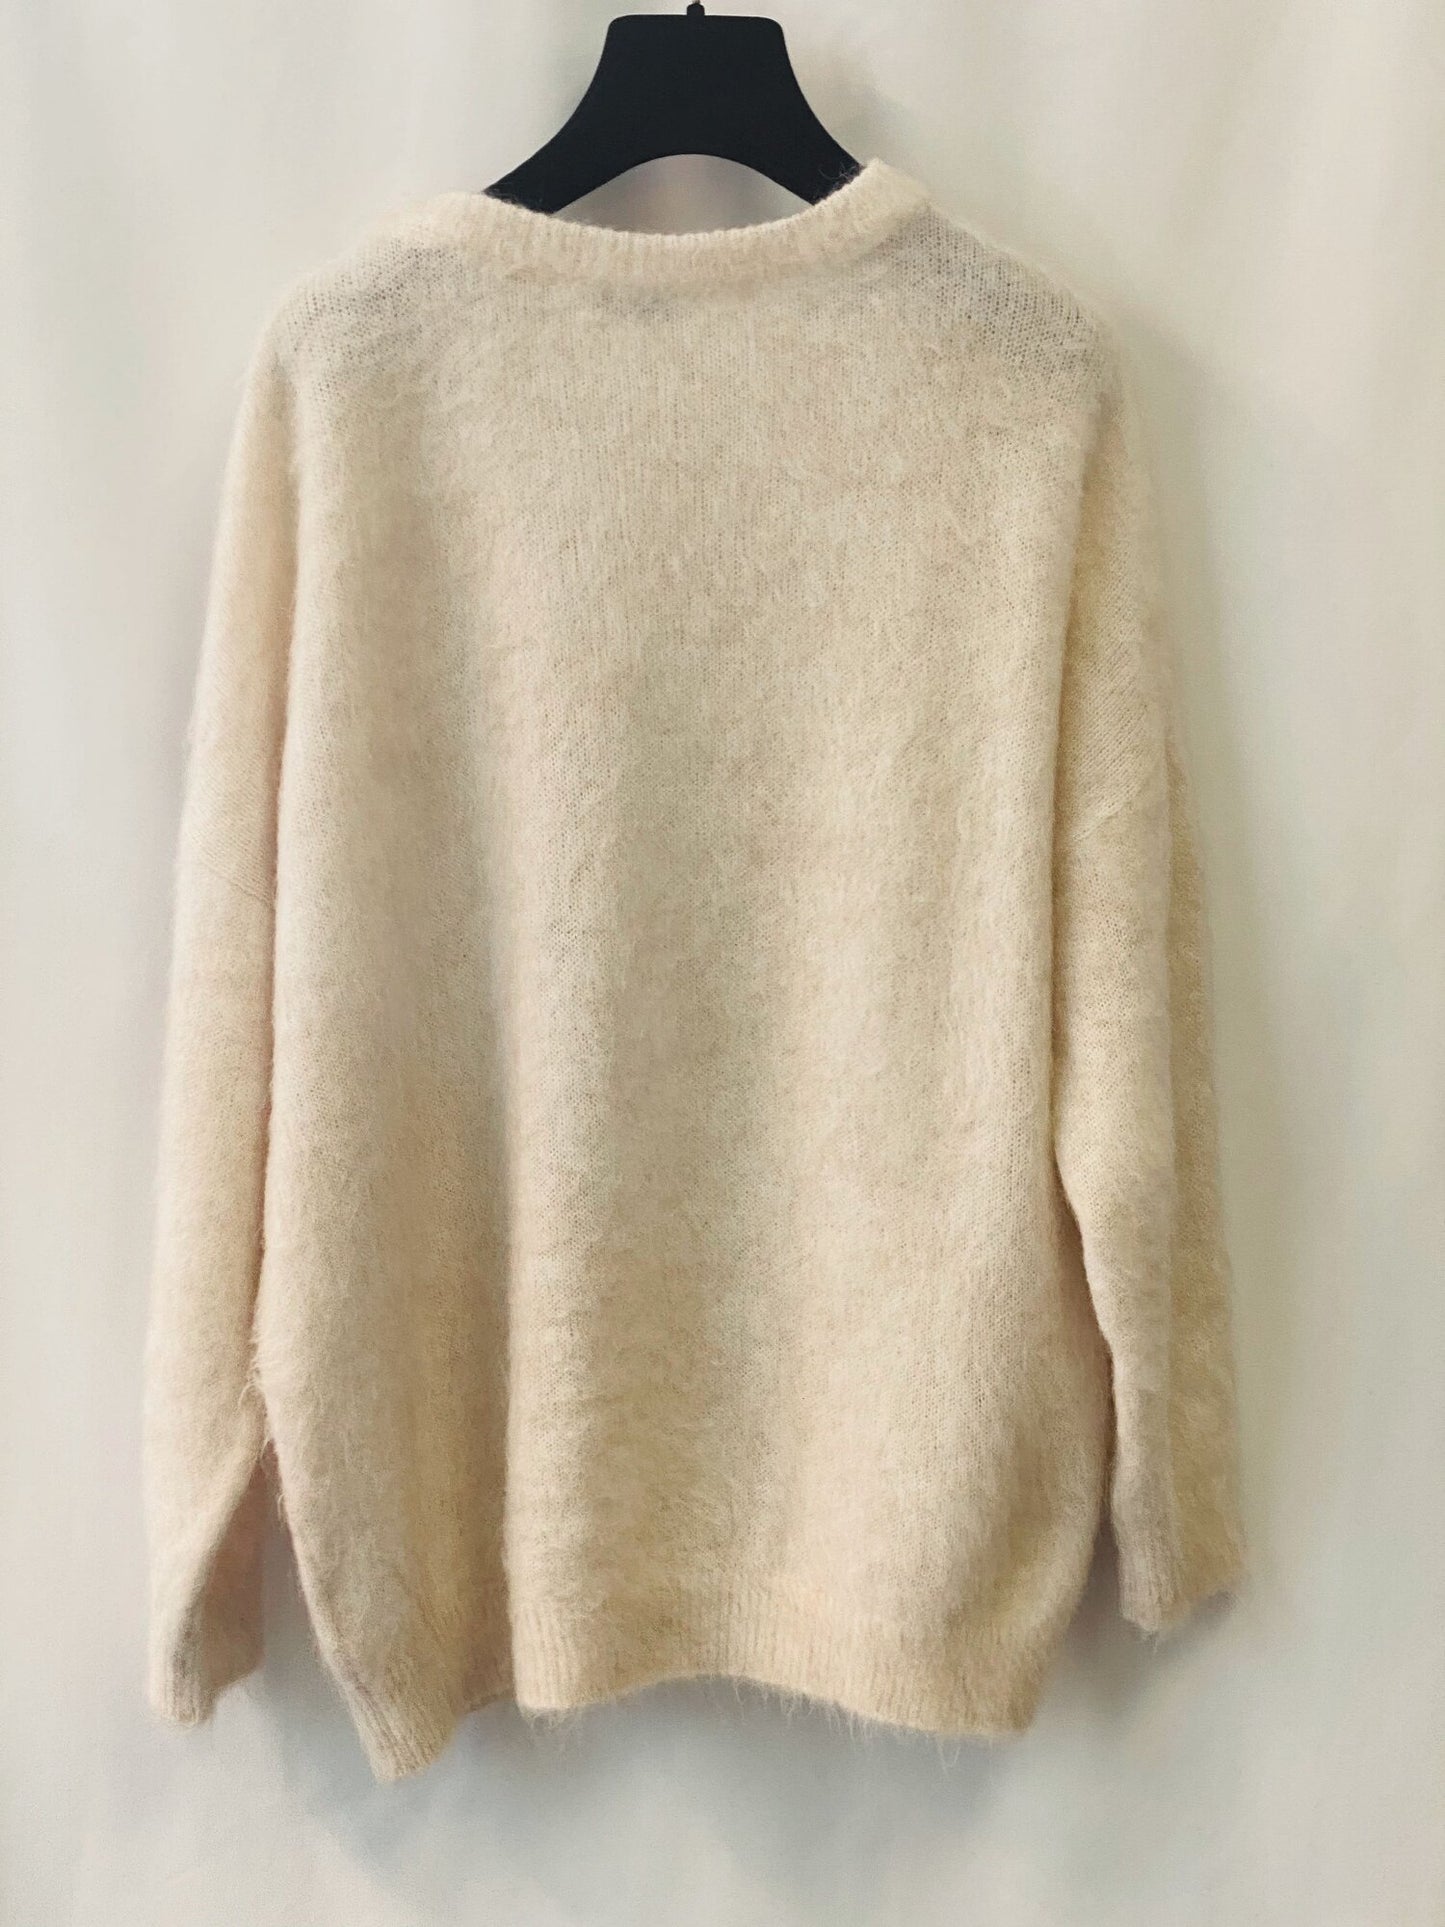 Brunello Cucinelli "be a good one" Alpaca Mohair Sweater | Size S